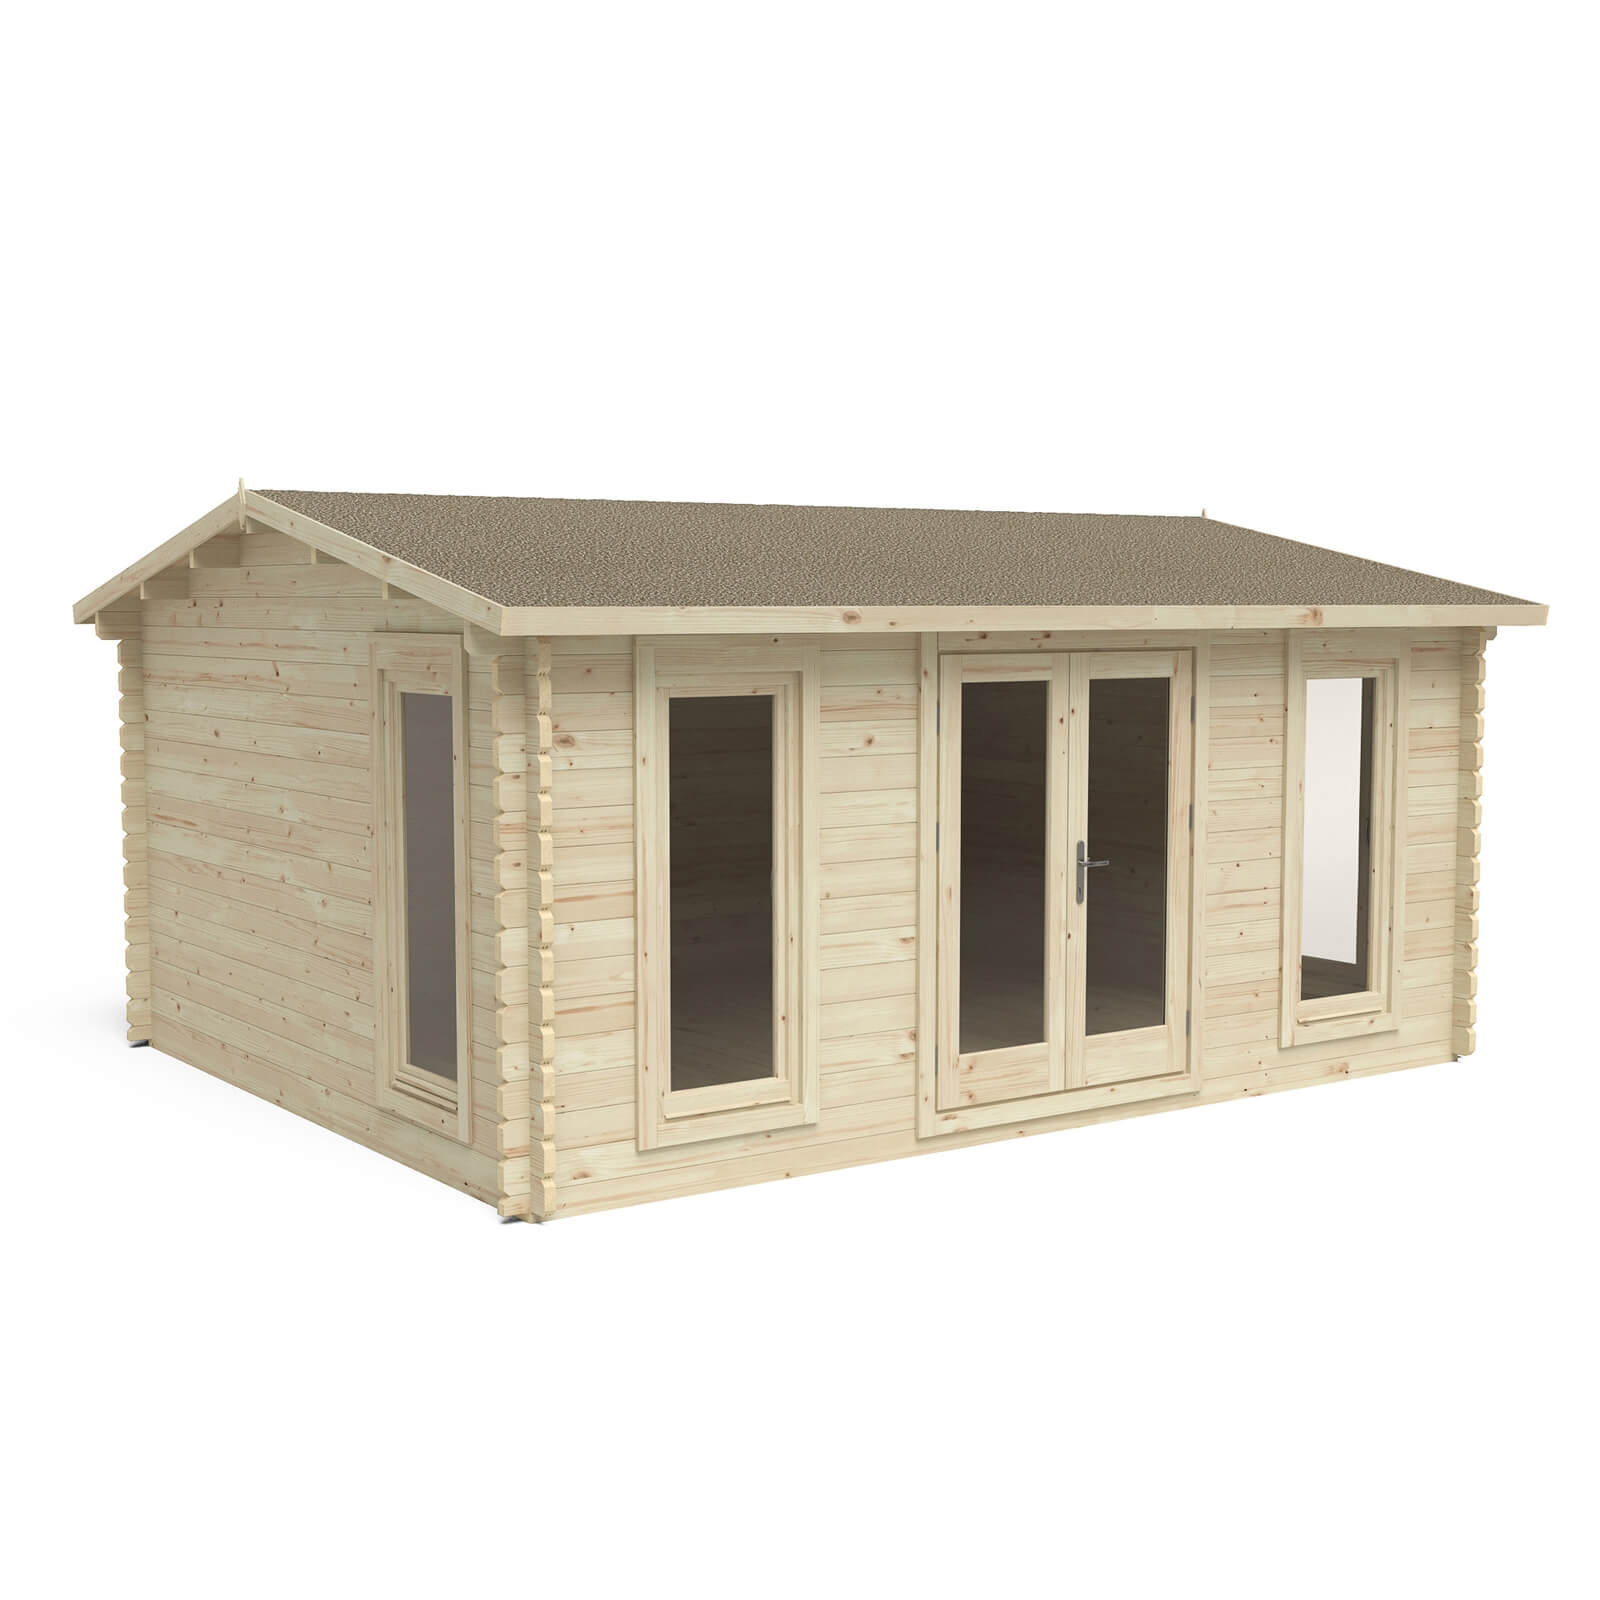 Forest Rushock 5.0m x 4.0m Log Cabin Double Glazed 24kg Polyester Felt, Plus Underlay - Installation Included